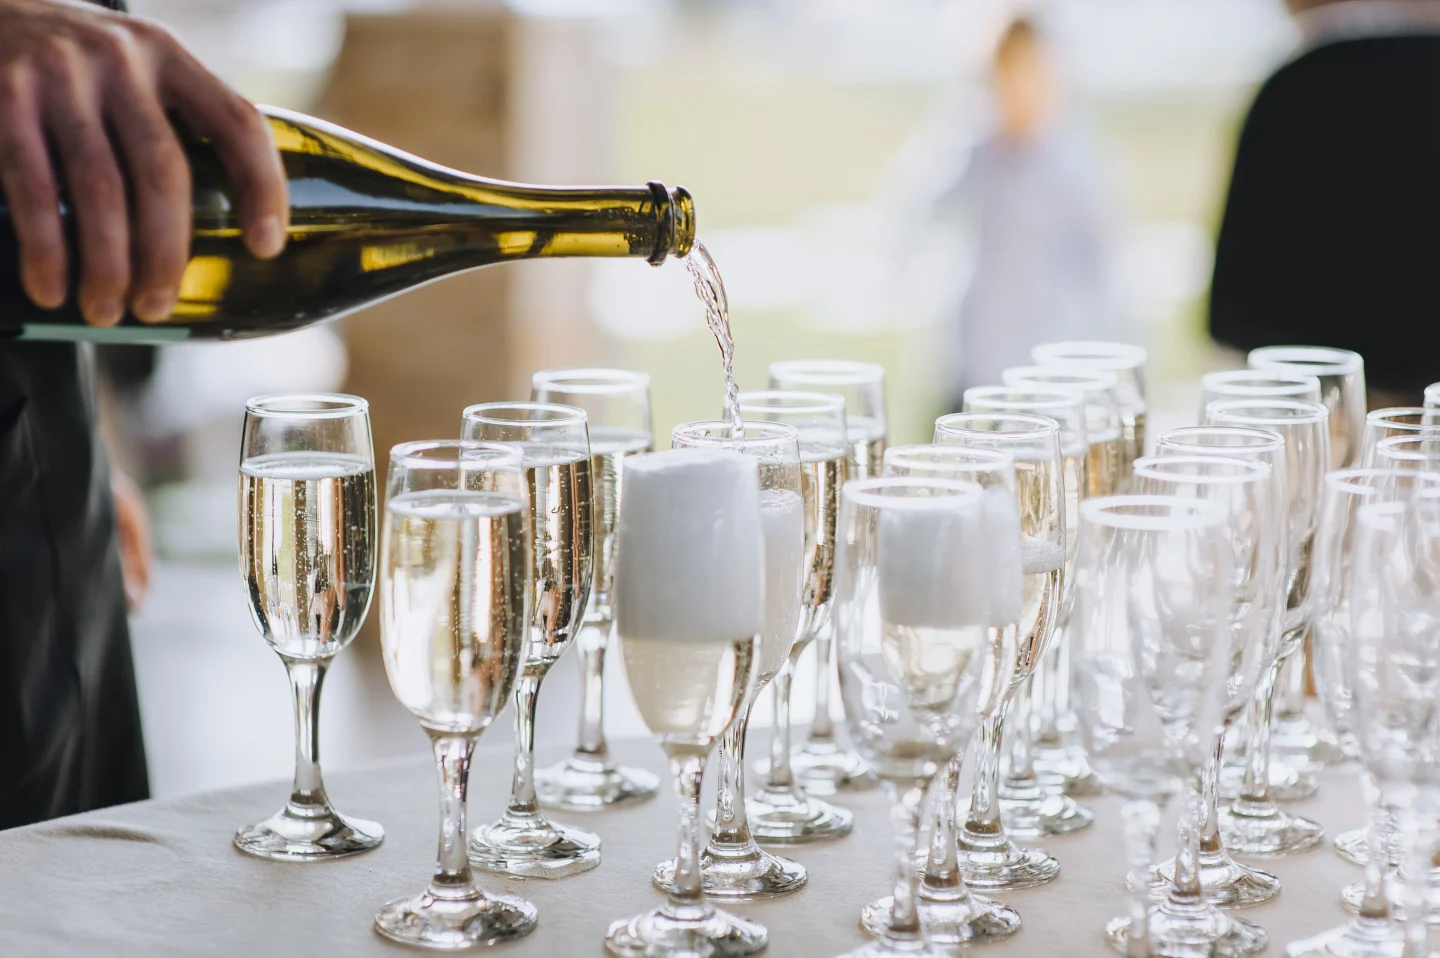 stylish-champagne-glasses-and-food-appetizers-on-table-at-wedding-picture-id961798406